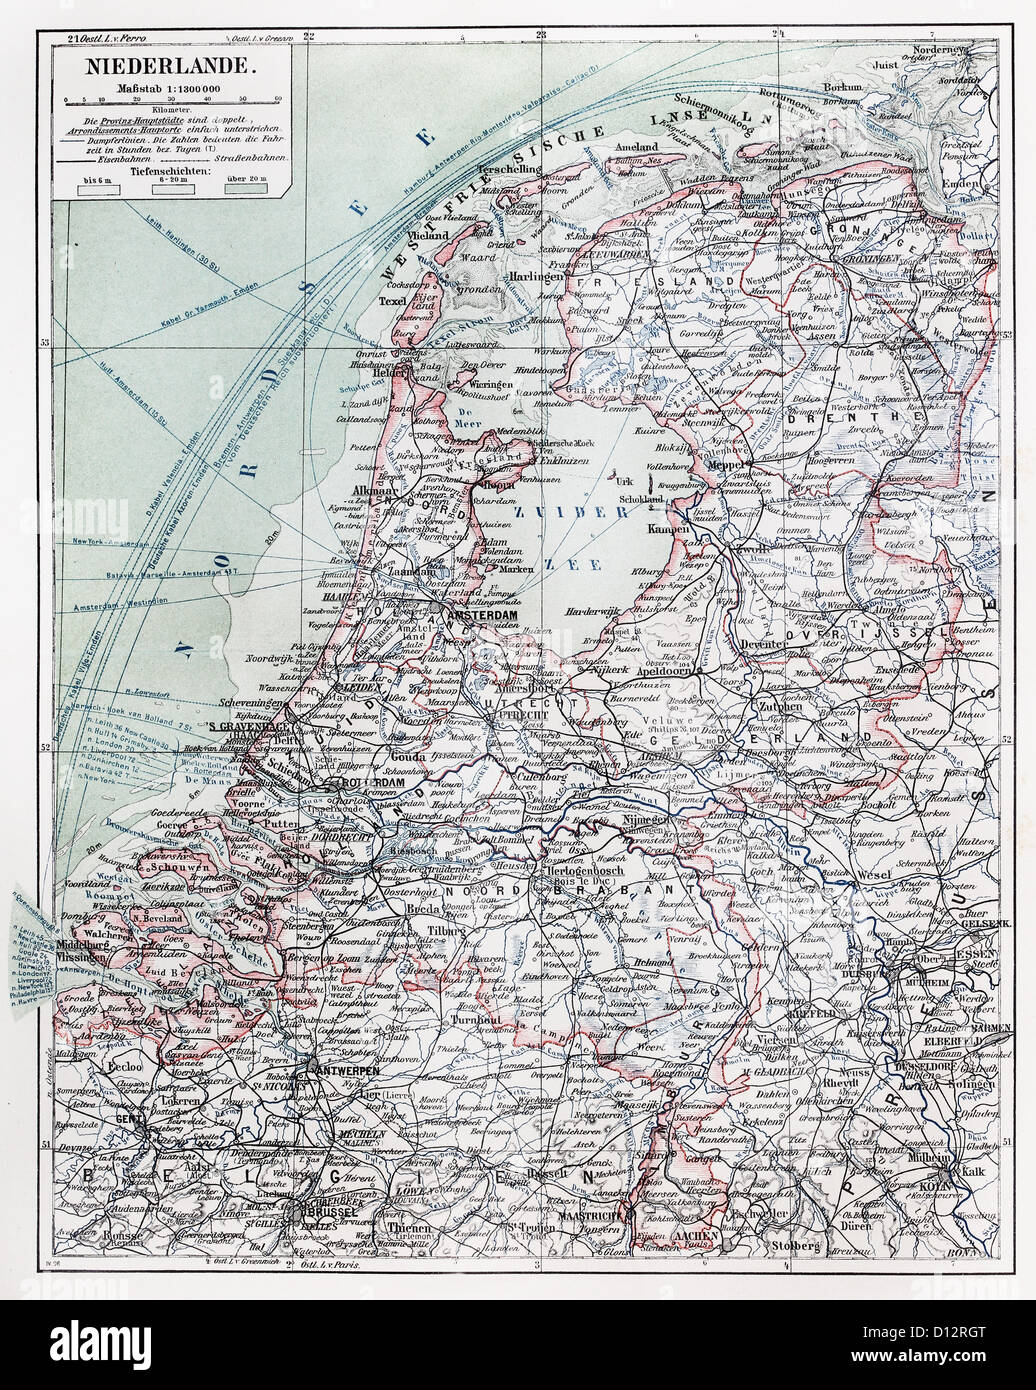 Vintage map of Nederland - Holland at the end of 19th century Stock Photo